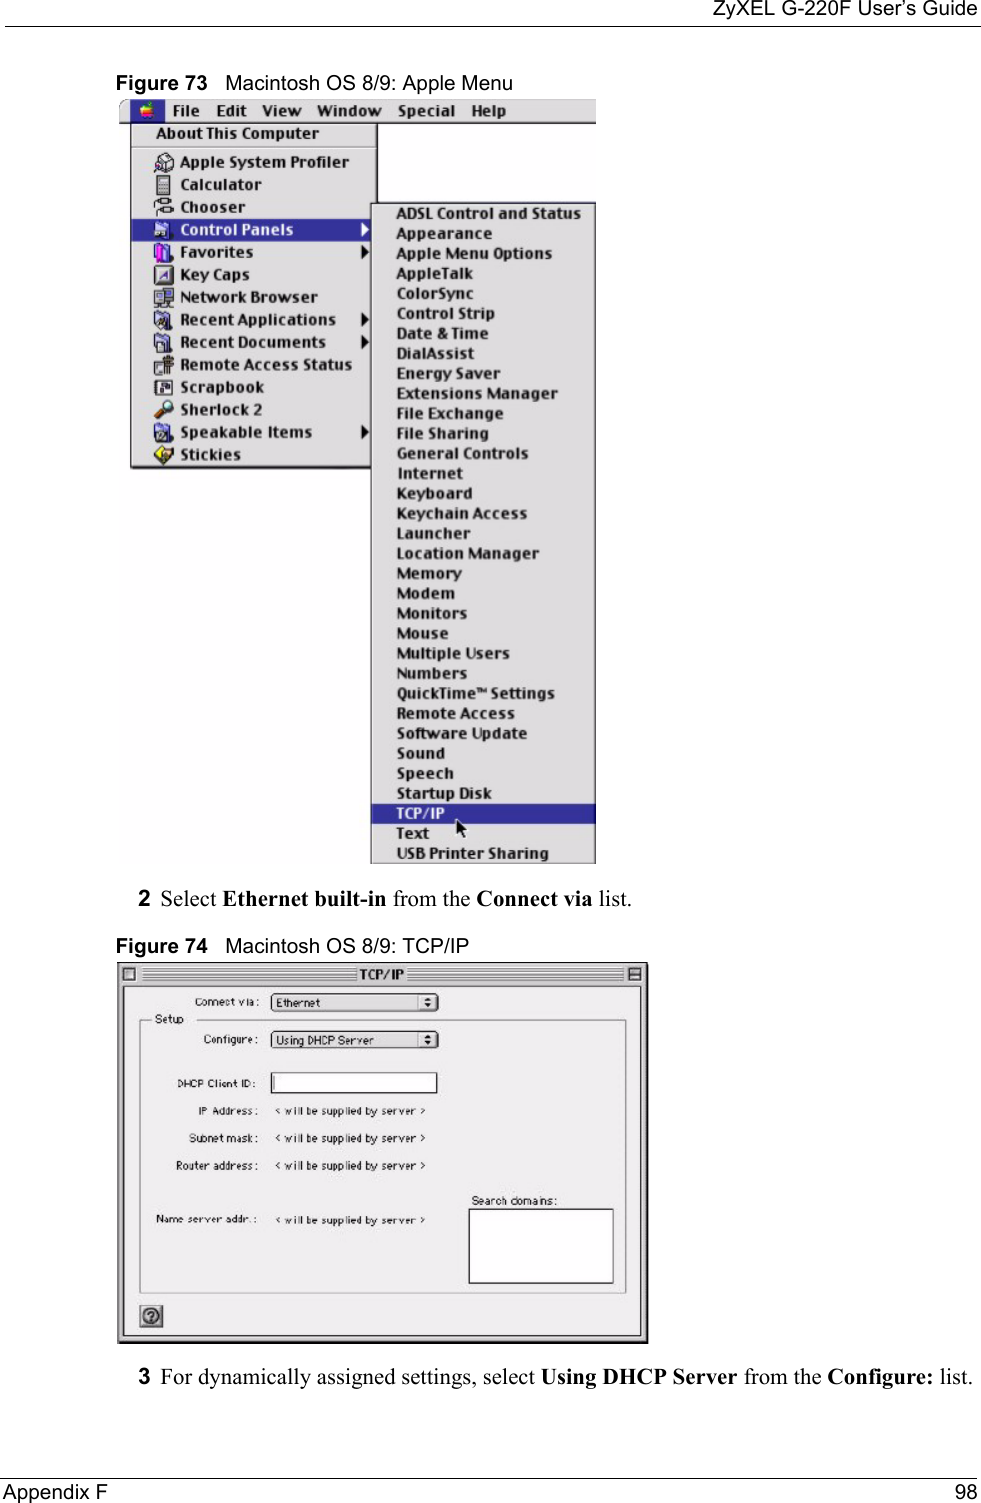 ZyXEL G-220F User’s GuideAppendix F 98Figure 73   Macintosh OS 8/9: Apple Menu2Select Ethernet built-in from the Connect via list.Figure 74   Macintosh OS 8/9: TCP/IP3For dynamically assigned settings, select Using DHCP Server from the Configure: list.